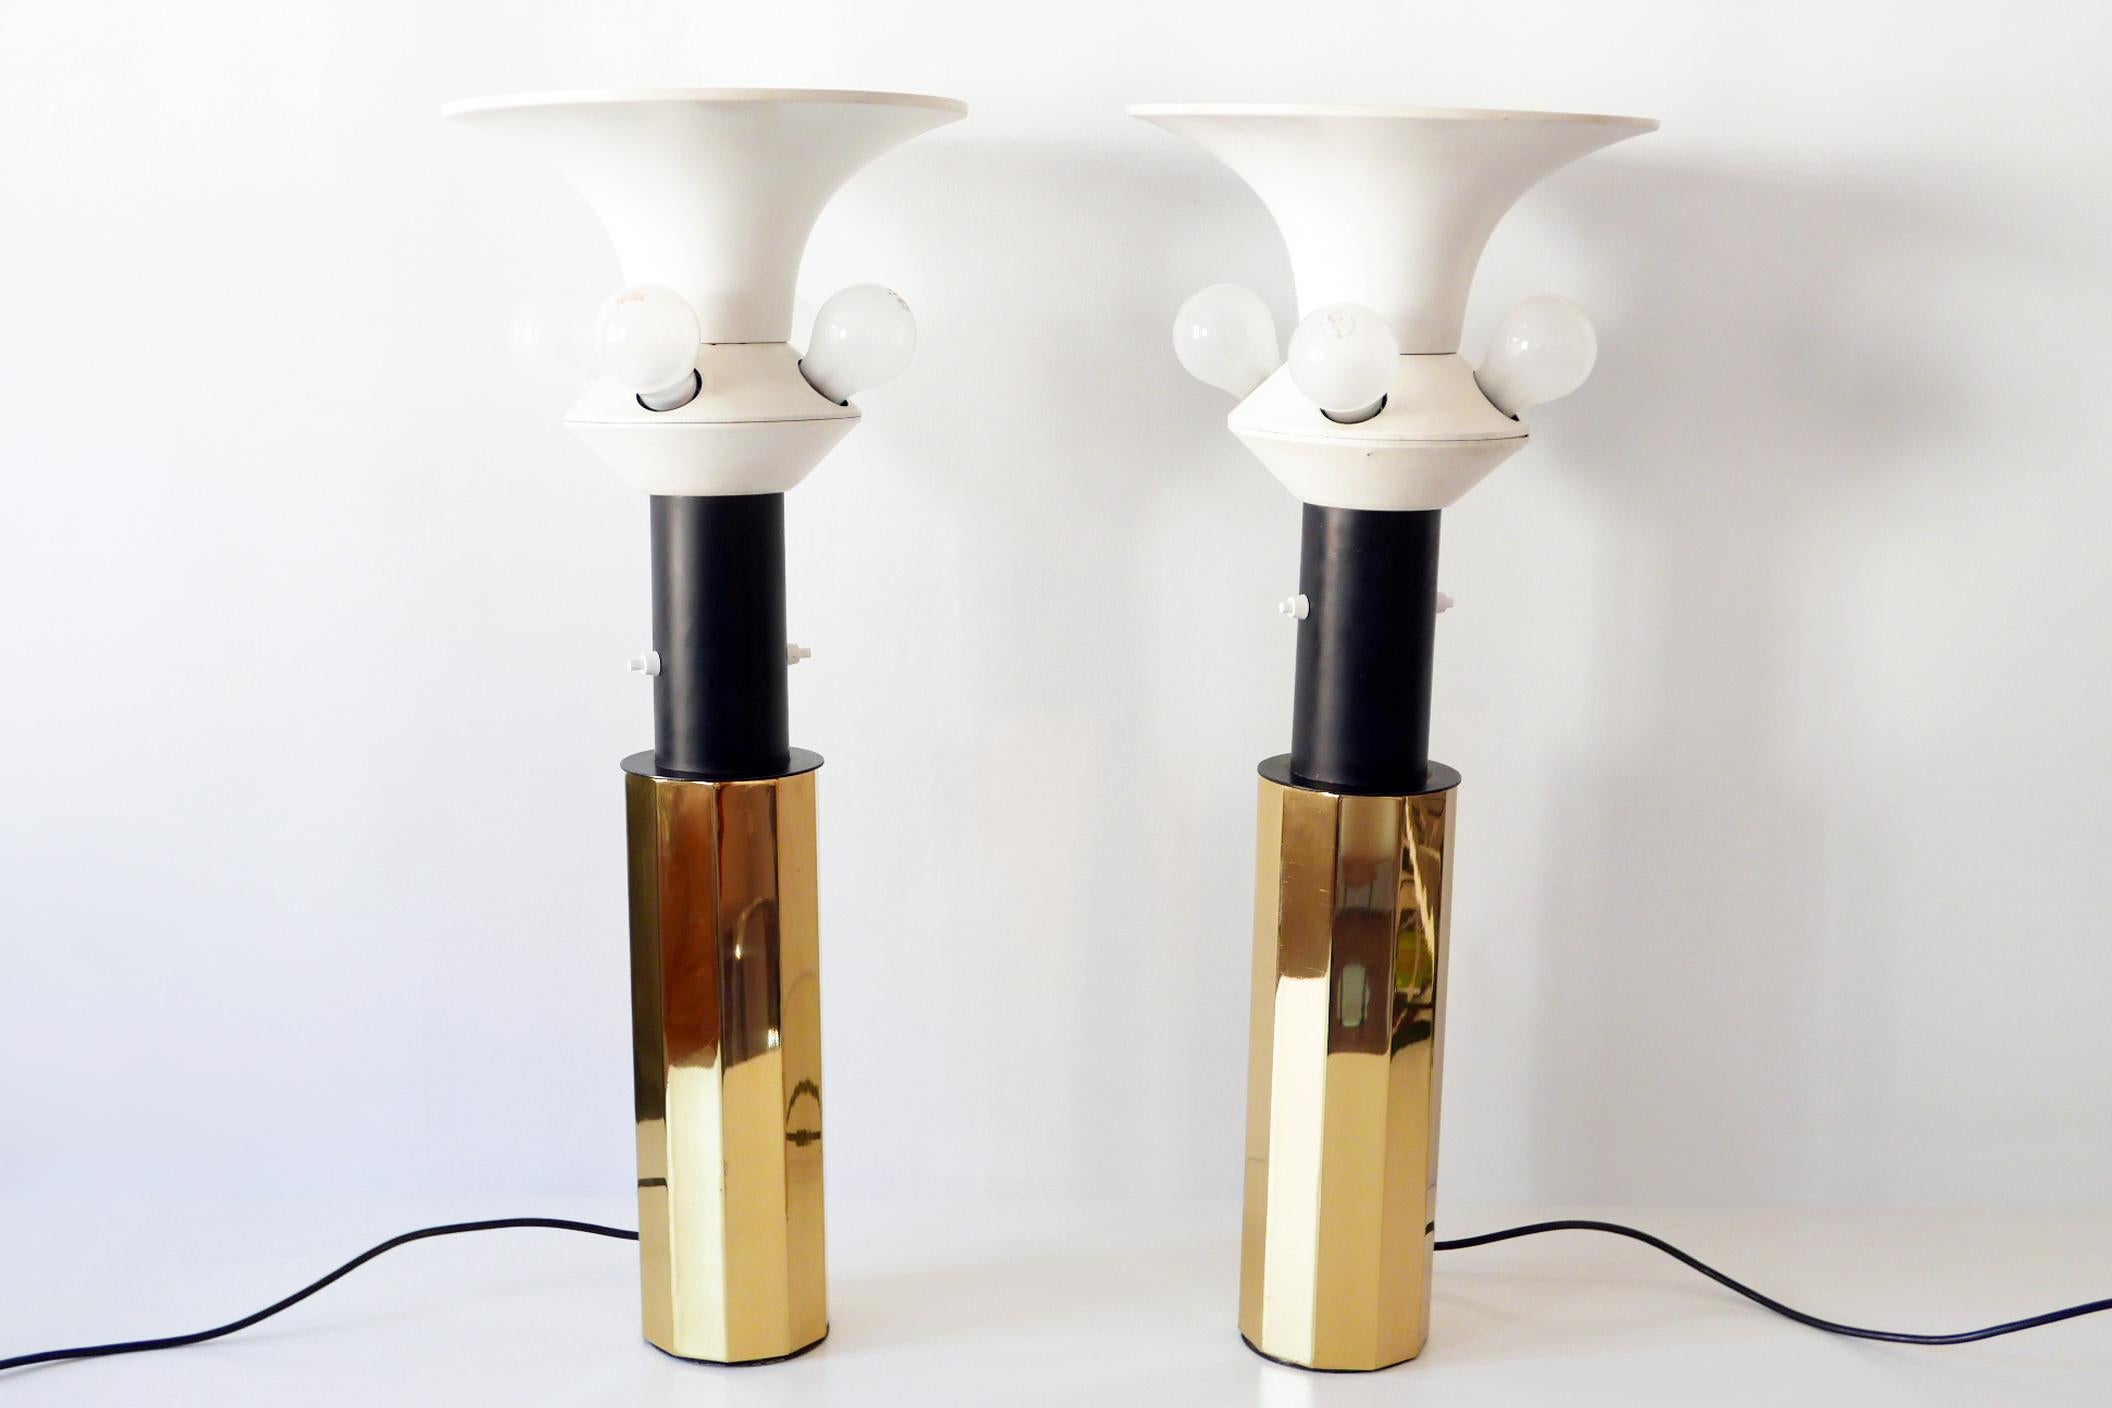 Set of Two Huge, 5-Flamed Midcentury Decagonal Brass Table Lamps, 1960s, Germany For Sale 7